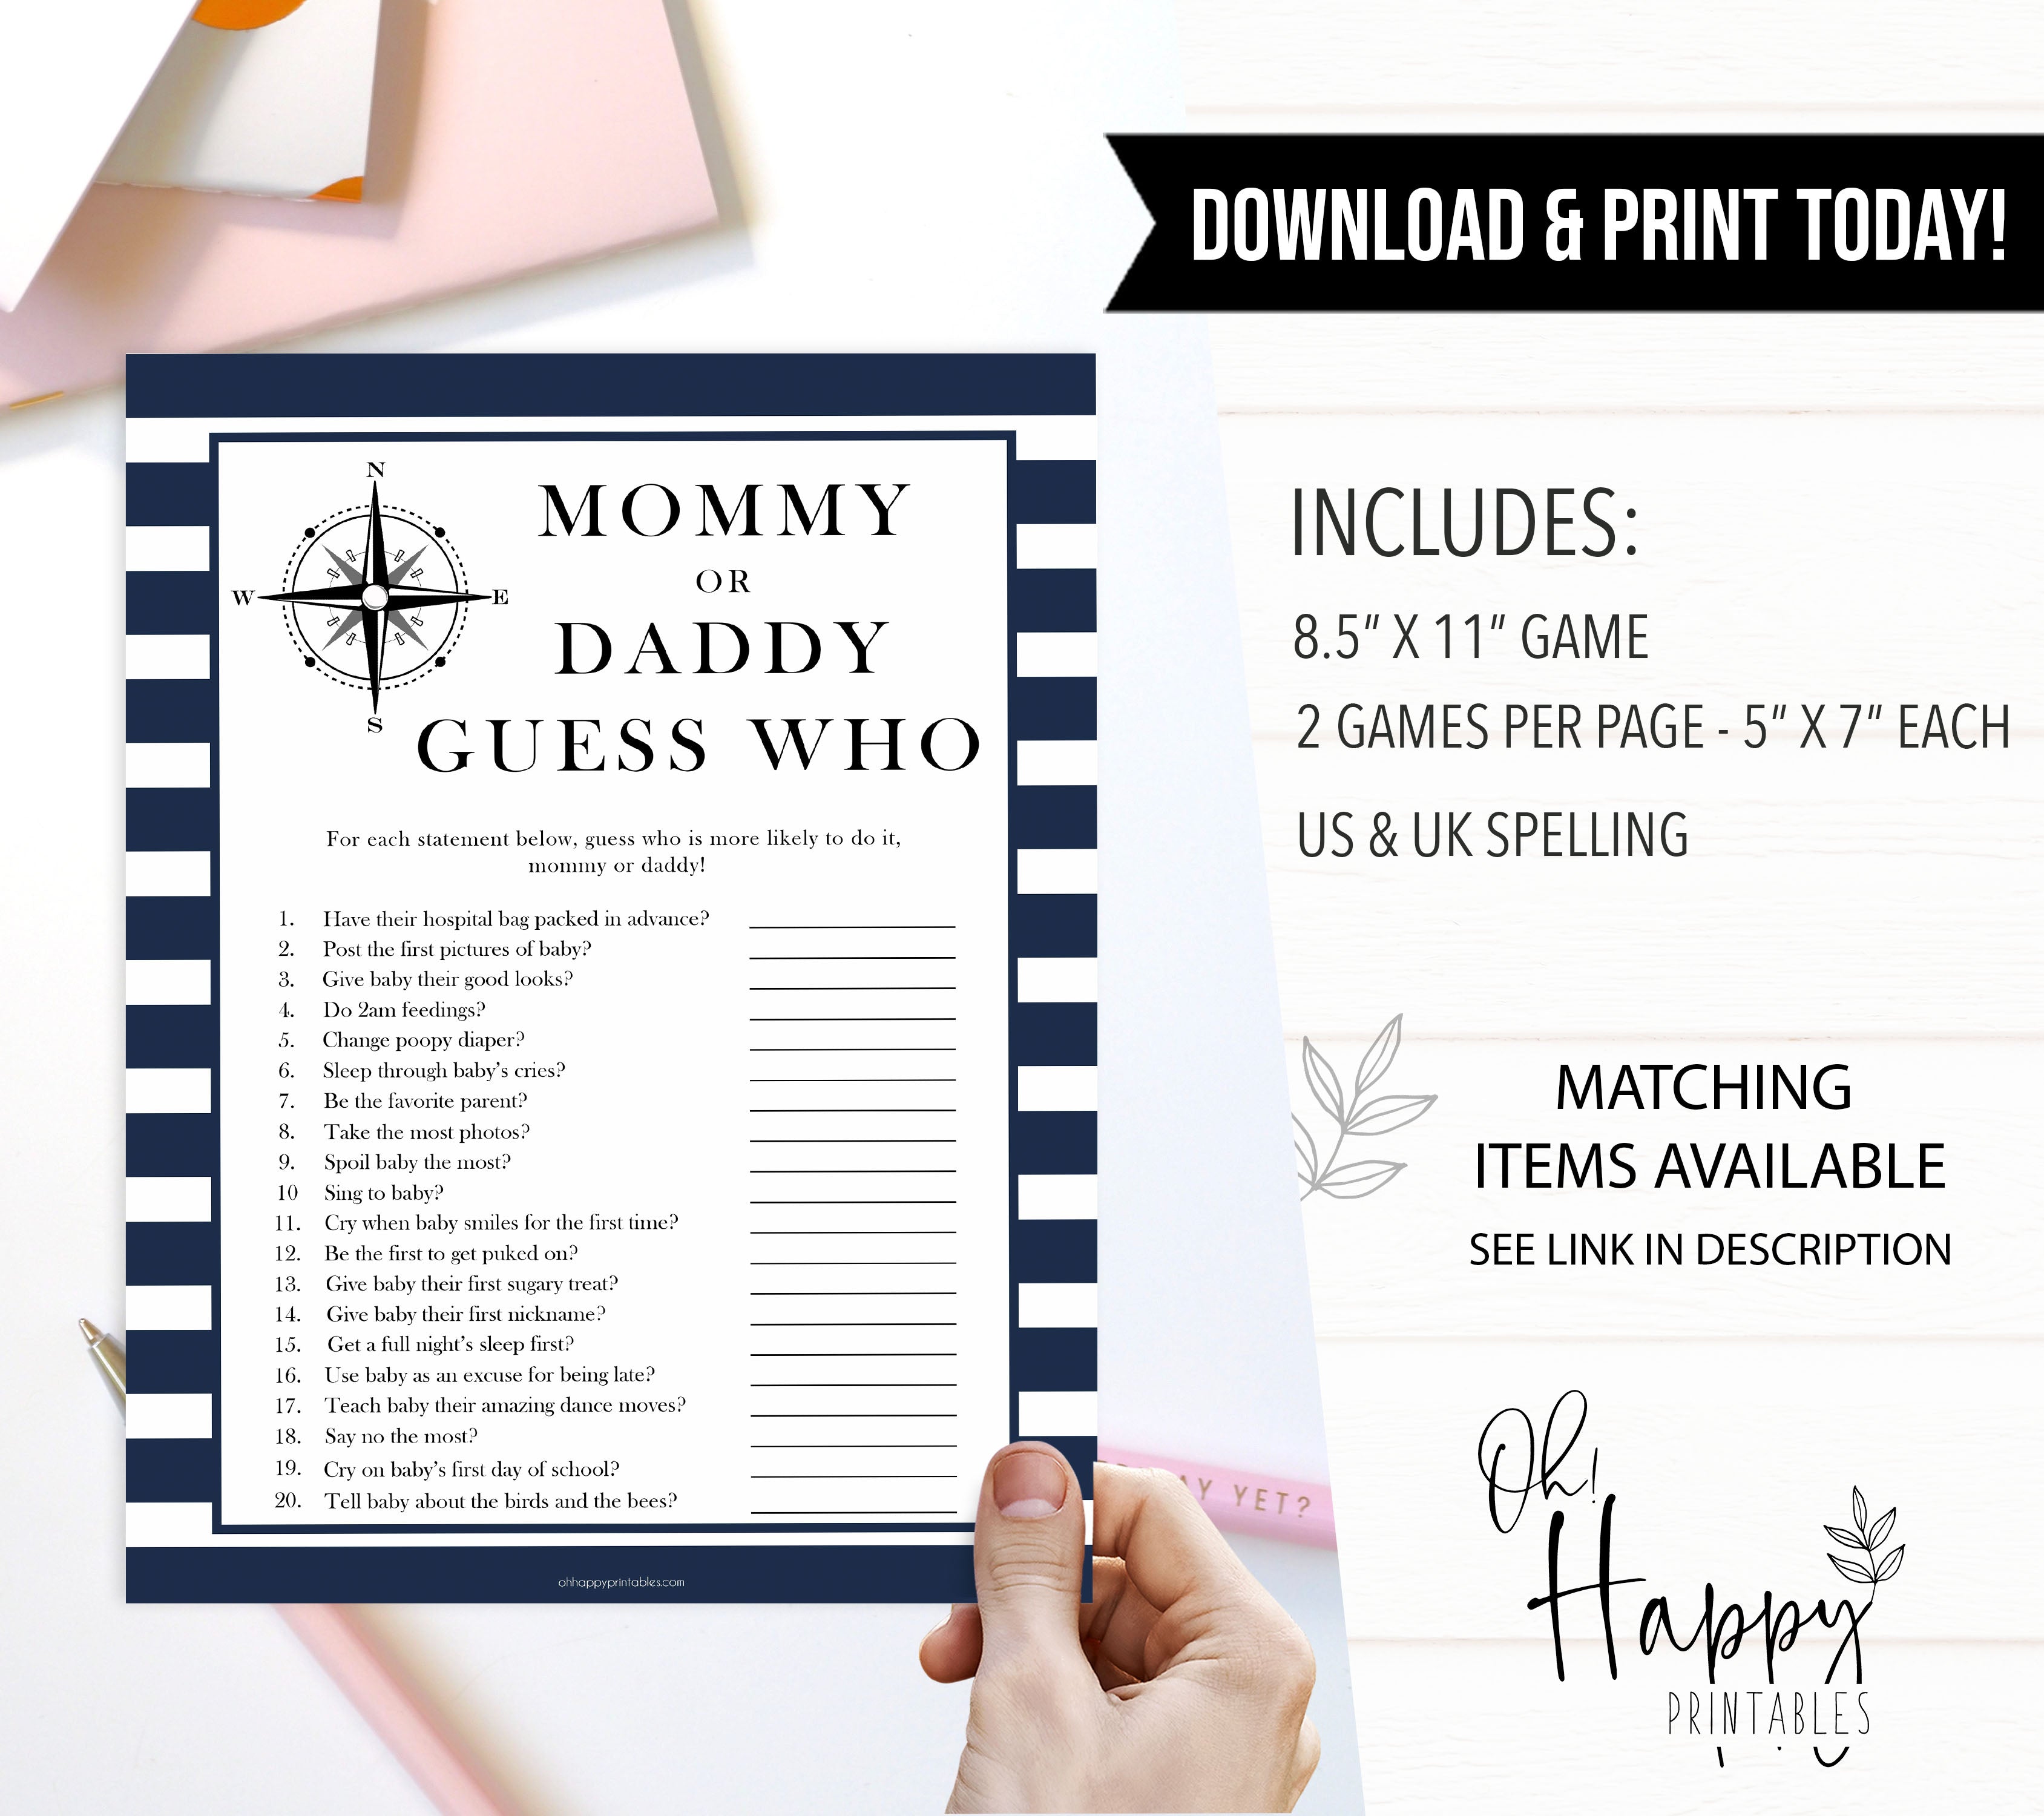 Nautical baby shower games, guess who mommy or daddy baby shower games, printable baby shower games, baby shower games, fun baby games, ahoy its a boy, popular baby shower games, sailor baby games, boat baby games